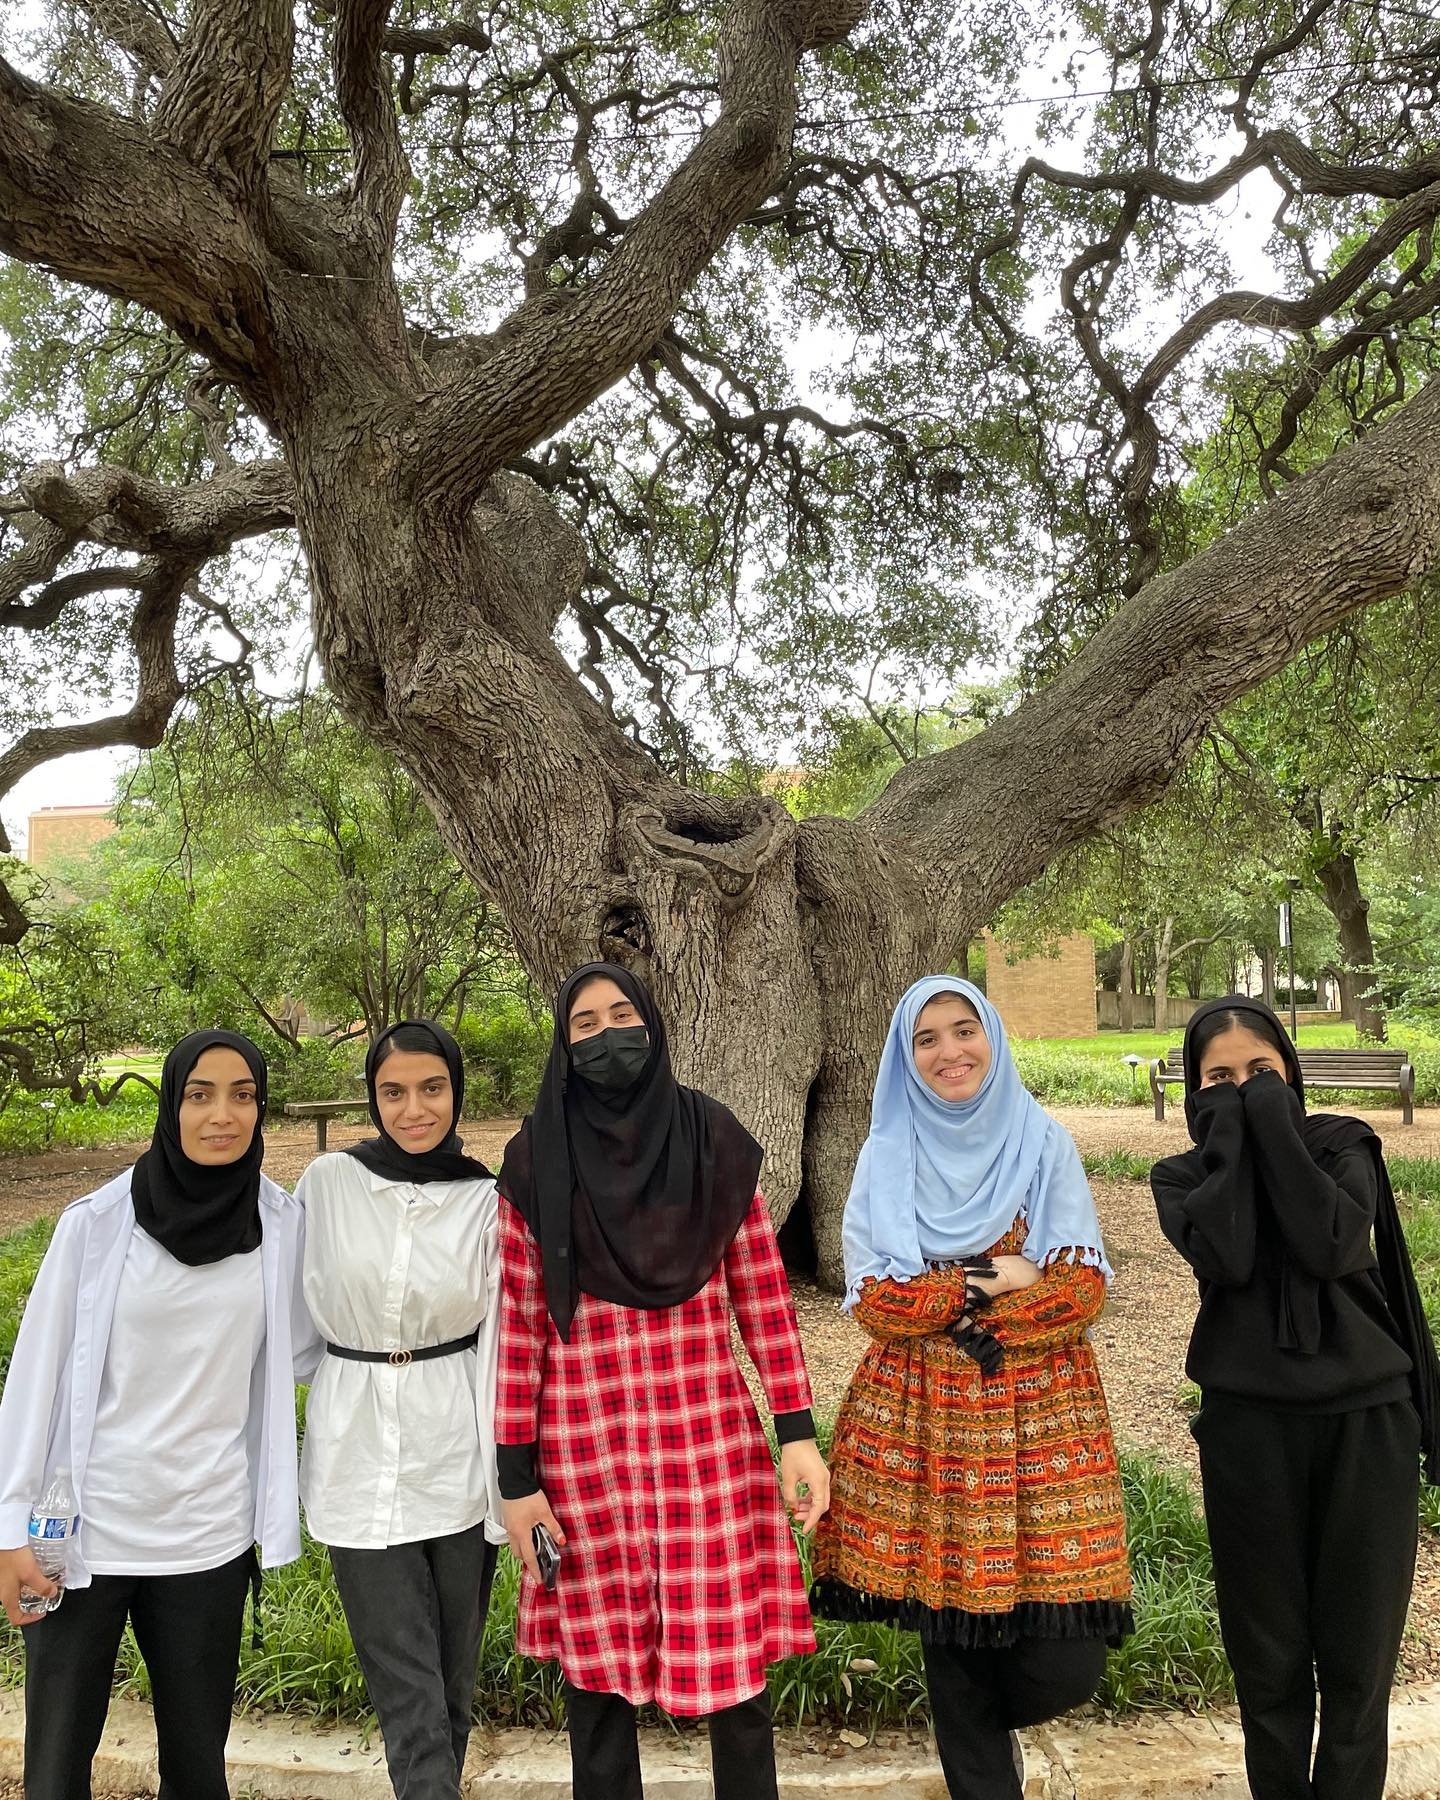 #tbt GirlForward: the college adventure edition ☺️🎓A few weeks ago, our incredible volunteers, Lily and Maggie, set up a tour at St. Edwards University for the girls! From seeing the science labs to the oldest living tree in Texas 🌳, the girls got 